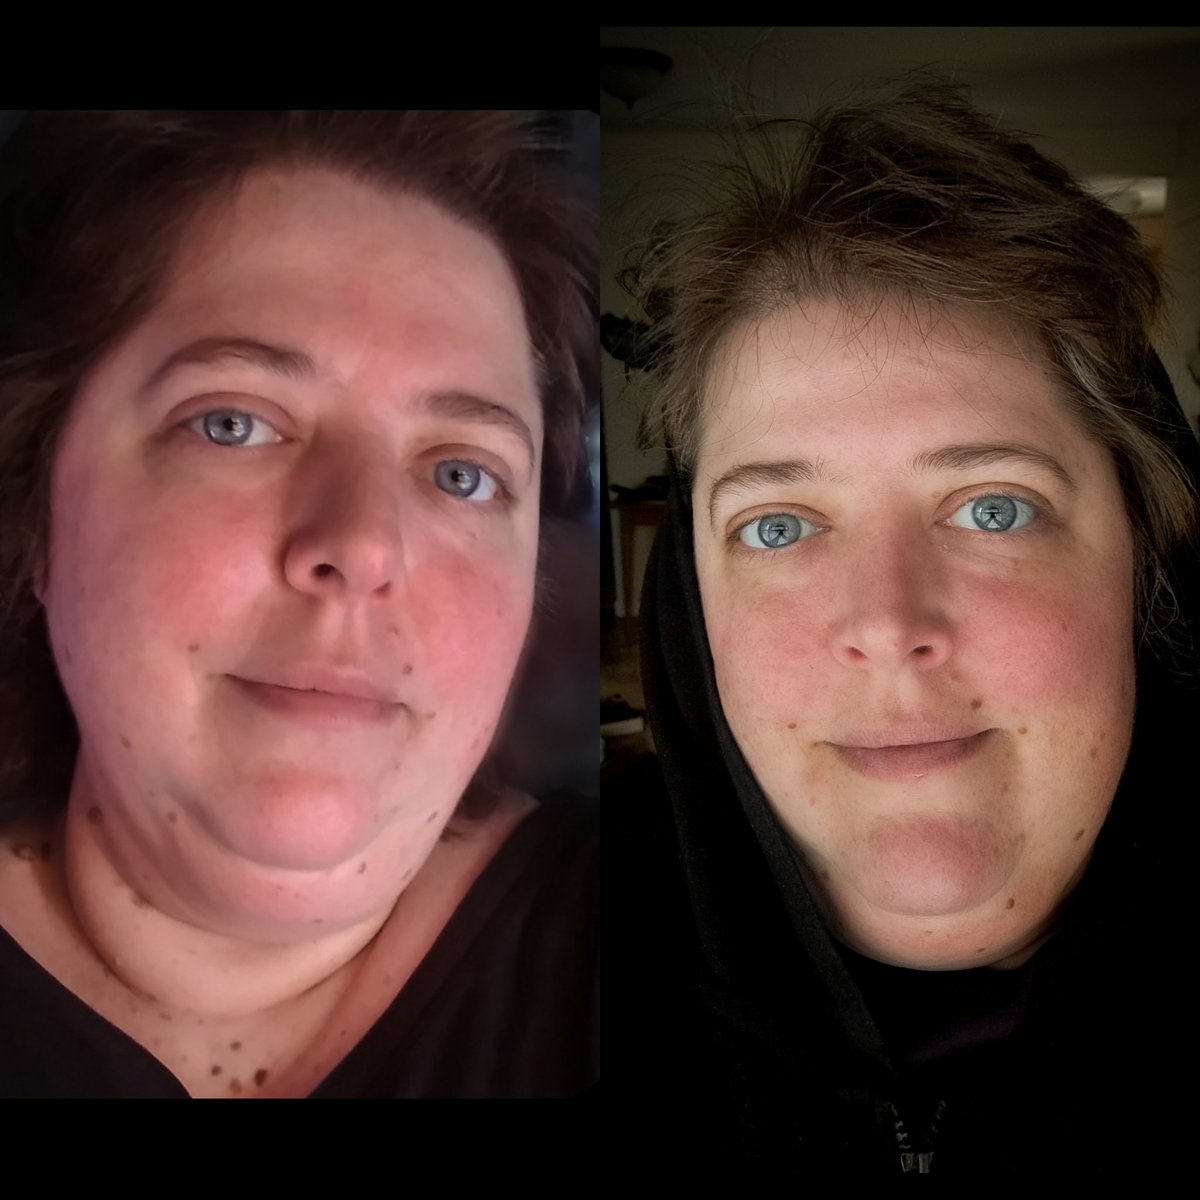 356 days sober...
9 days away from my 1st full year alcohol free
The left photo was day 1. The right photo is today.
#RecoveryPosse #odaat #sobriety #boozefree #noalcohol #formeralcoholic #soberlife